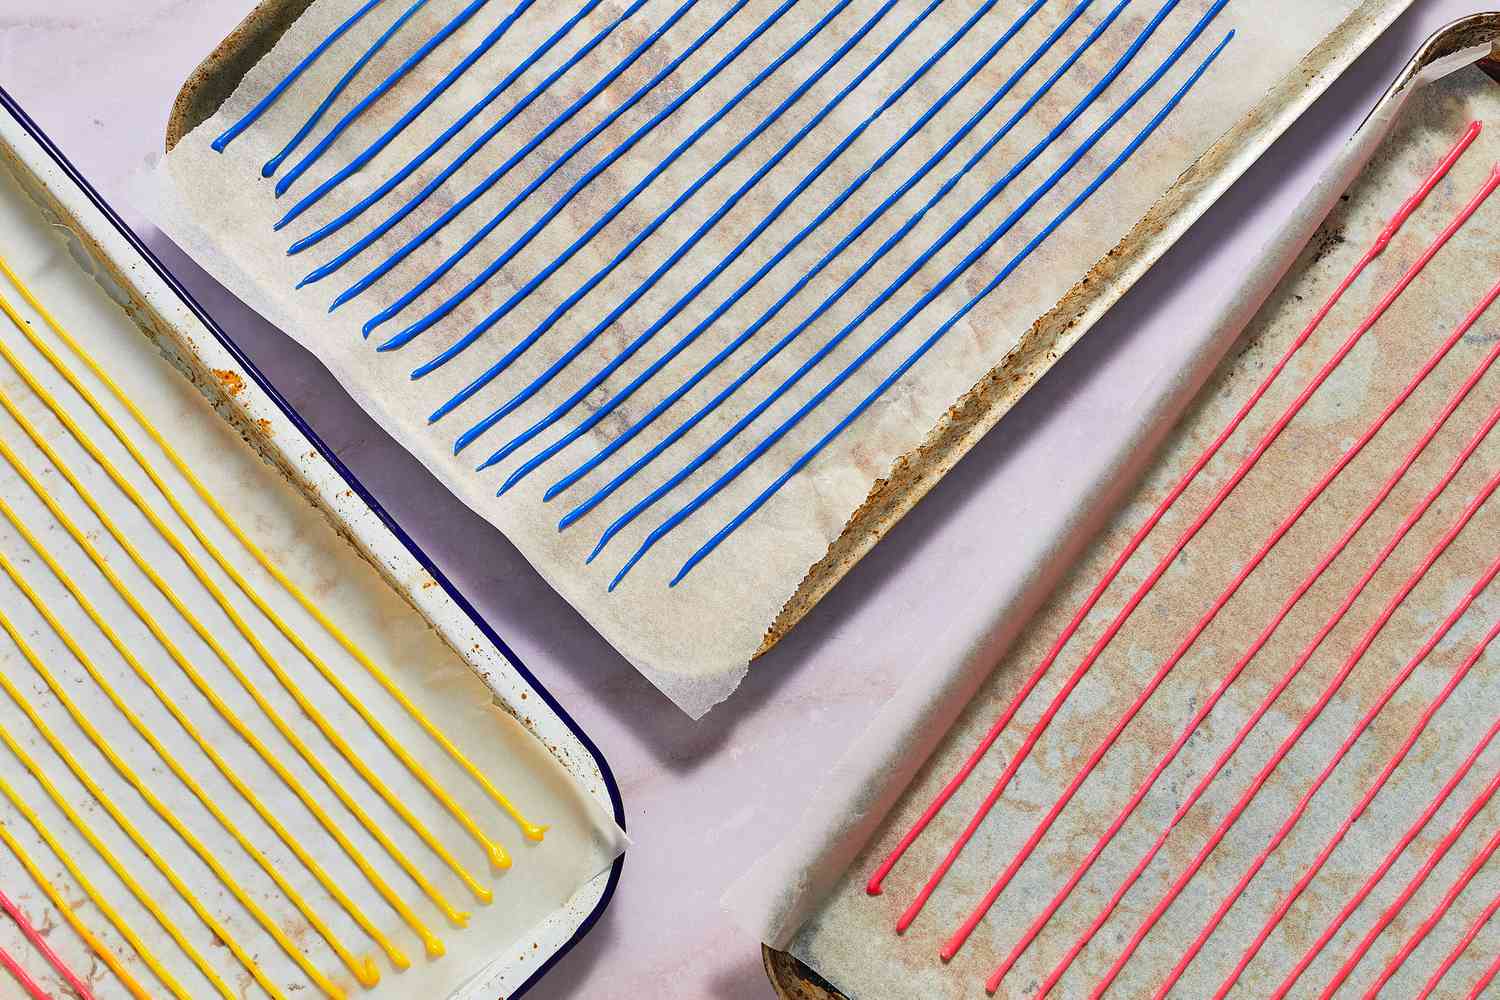 Parchment-lined baking sheets with long lines of piped sprinkle batter